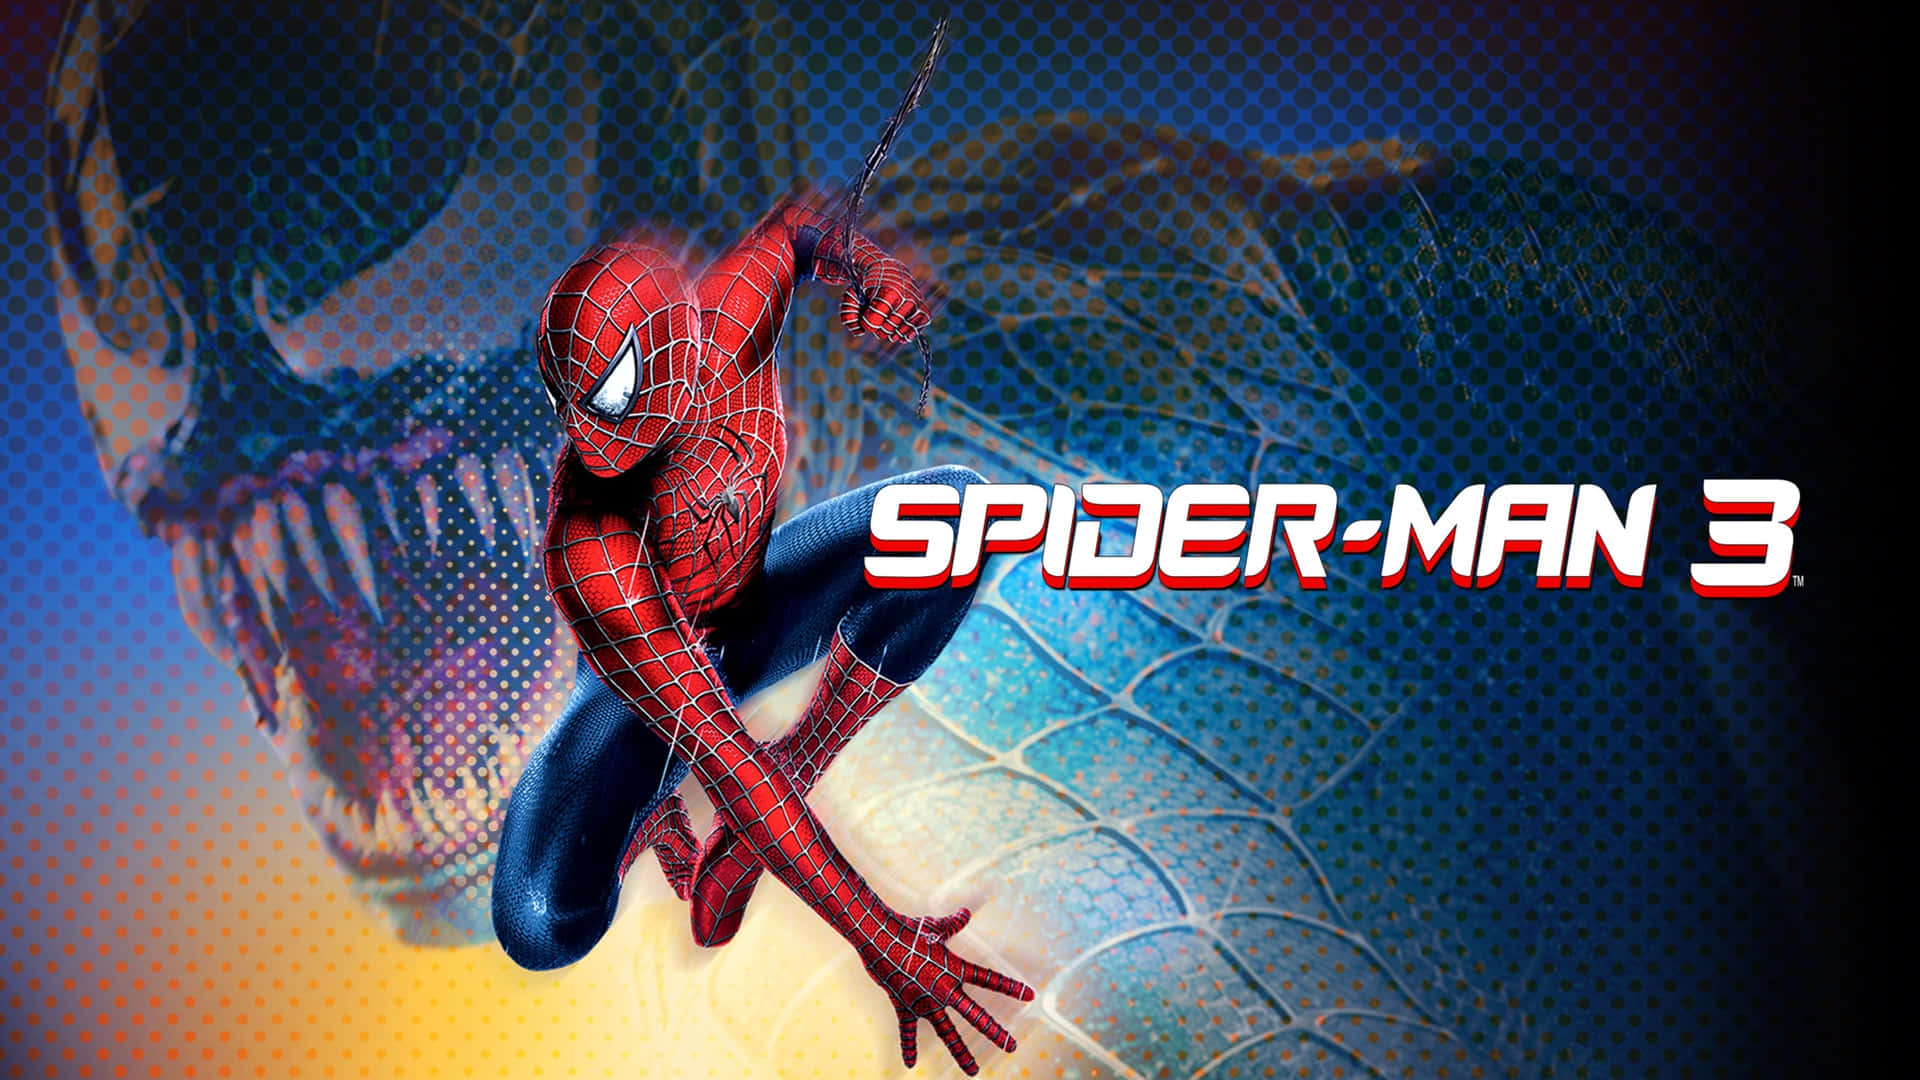 Spider-Man 3: Action-packed adventure with Peter Parker and his alter ego Wallpaper